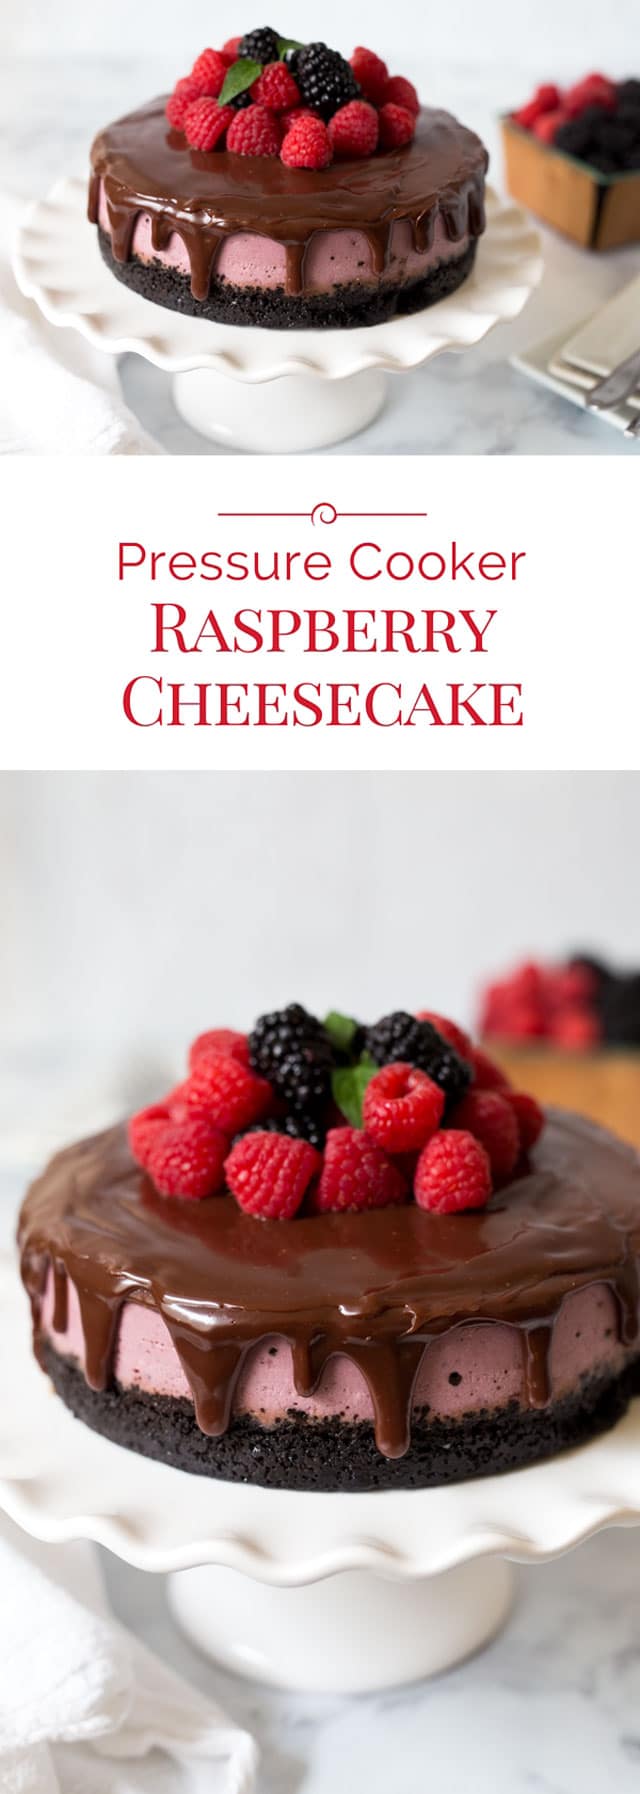 This beautiful Raspberry Cheesecake has an Oreo cookie crust covered with rich chocolate ganache and crowned with fresh raspberries. It's easy to make a creamy cheesecake in an Instant Pot. #pressurecooker #instantpot #instapot #cheesecake #dessert #pressurecooking via @PressureCook2da